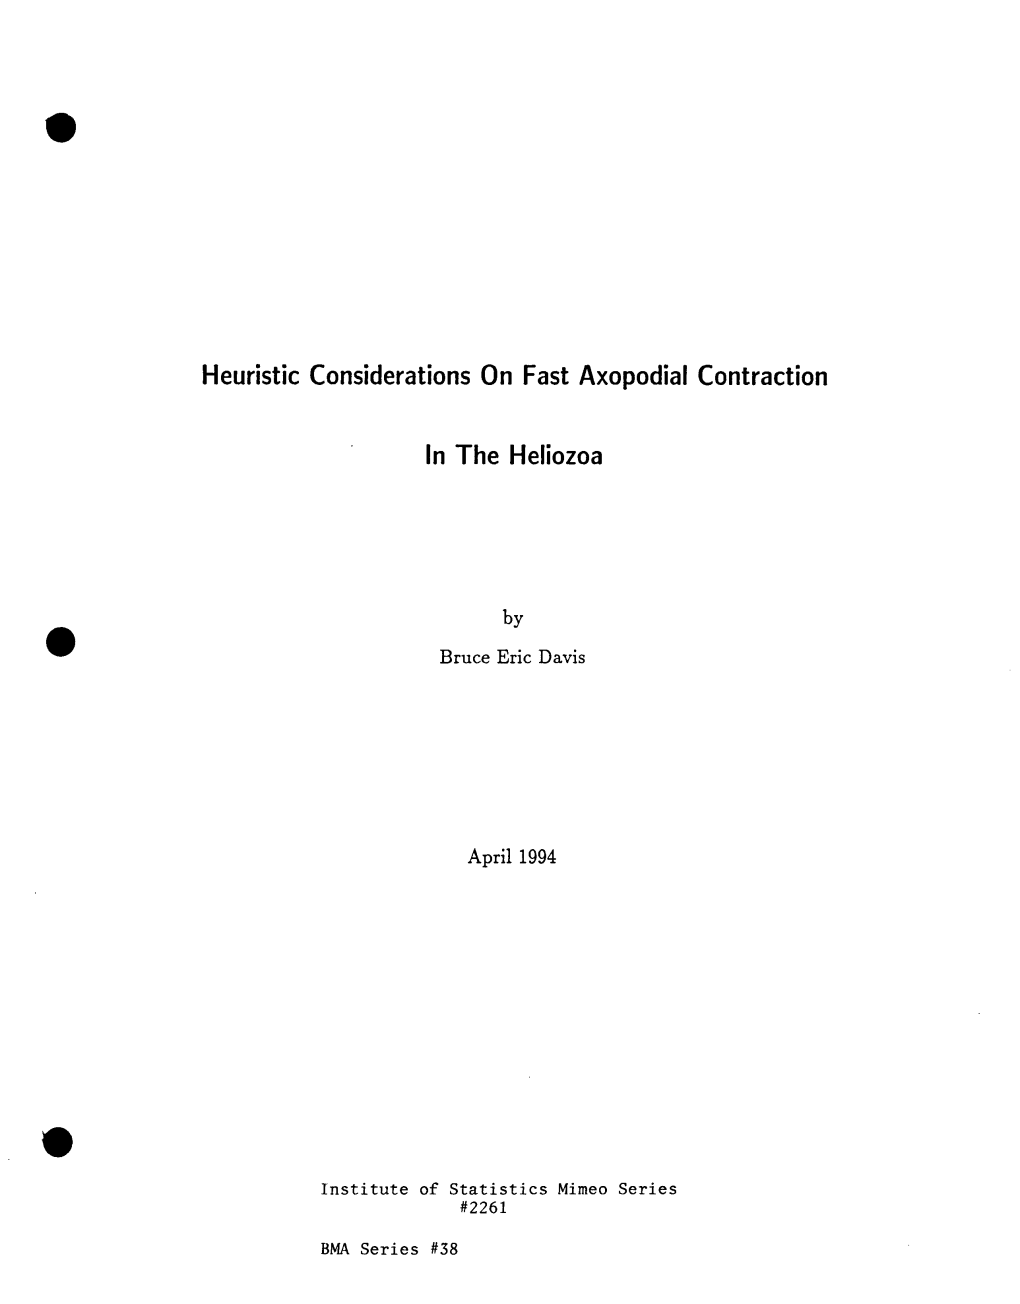 Heuristic Considerations on Fast Axopodial Contraction in the Heliozoa